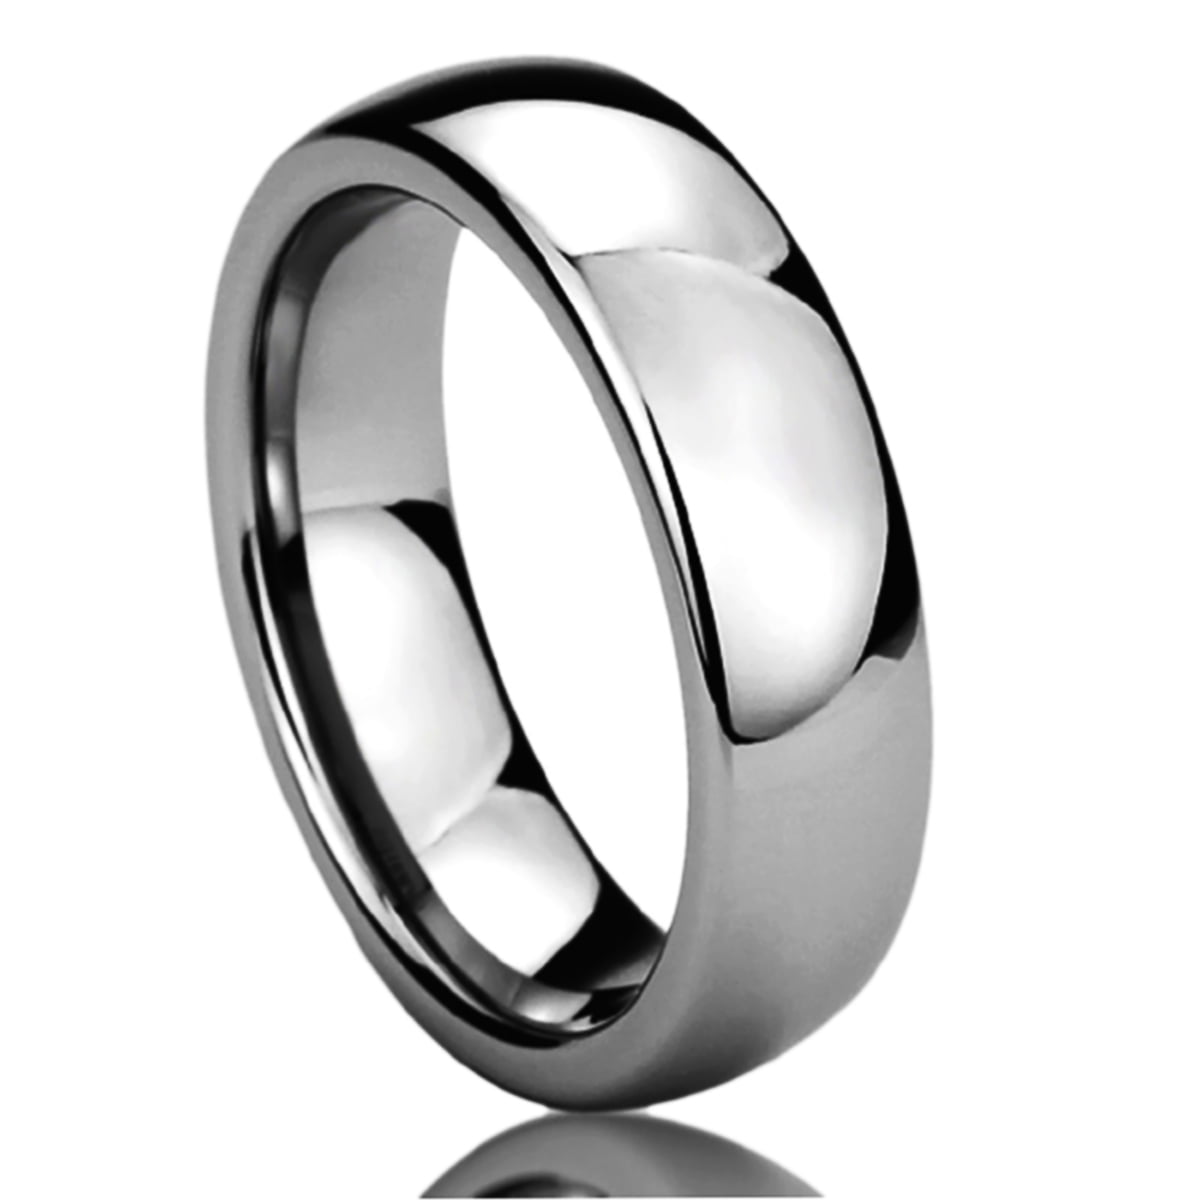 Prime Pristine Personalized Inside Engraving Tungsten Carbide Wedding Band Ring 8mm Domed Groove Ring